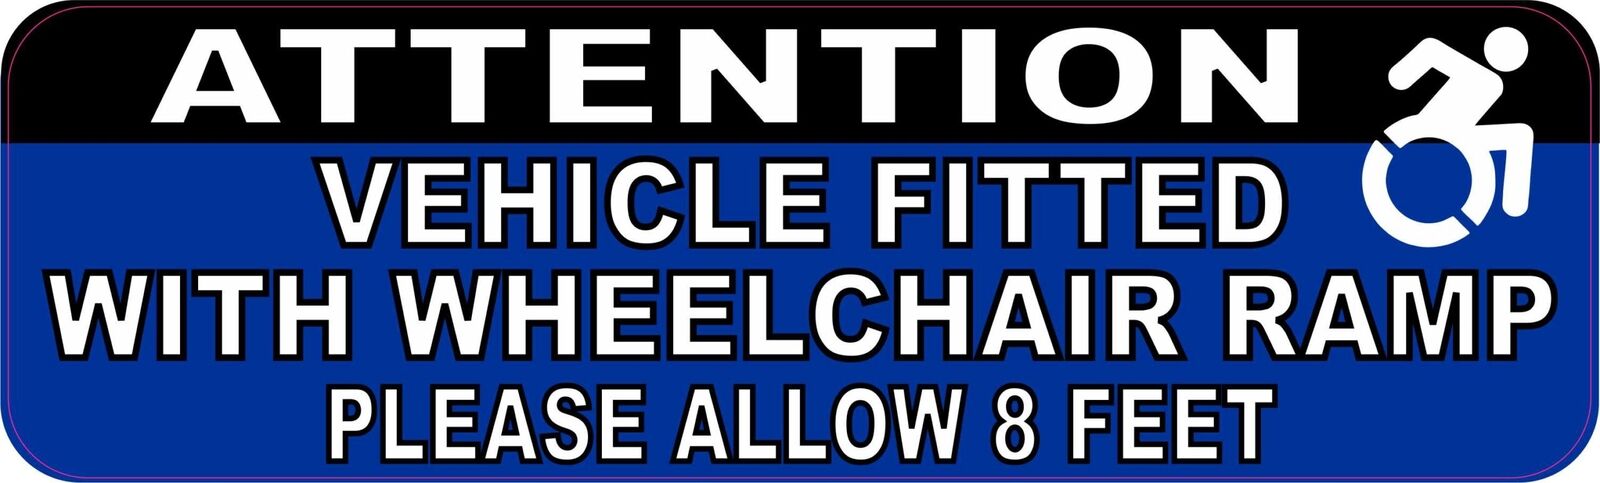 10in x 3in Vehicle Fitted With Wheelchair Ramp Magnet Car Truck Magnetic Sign